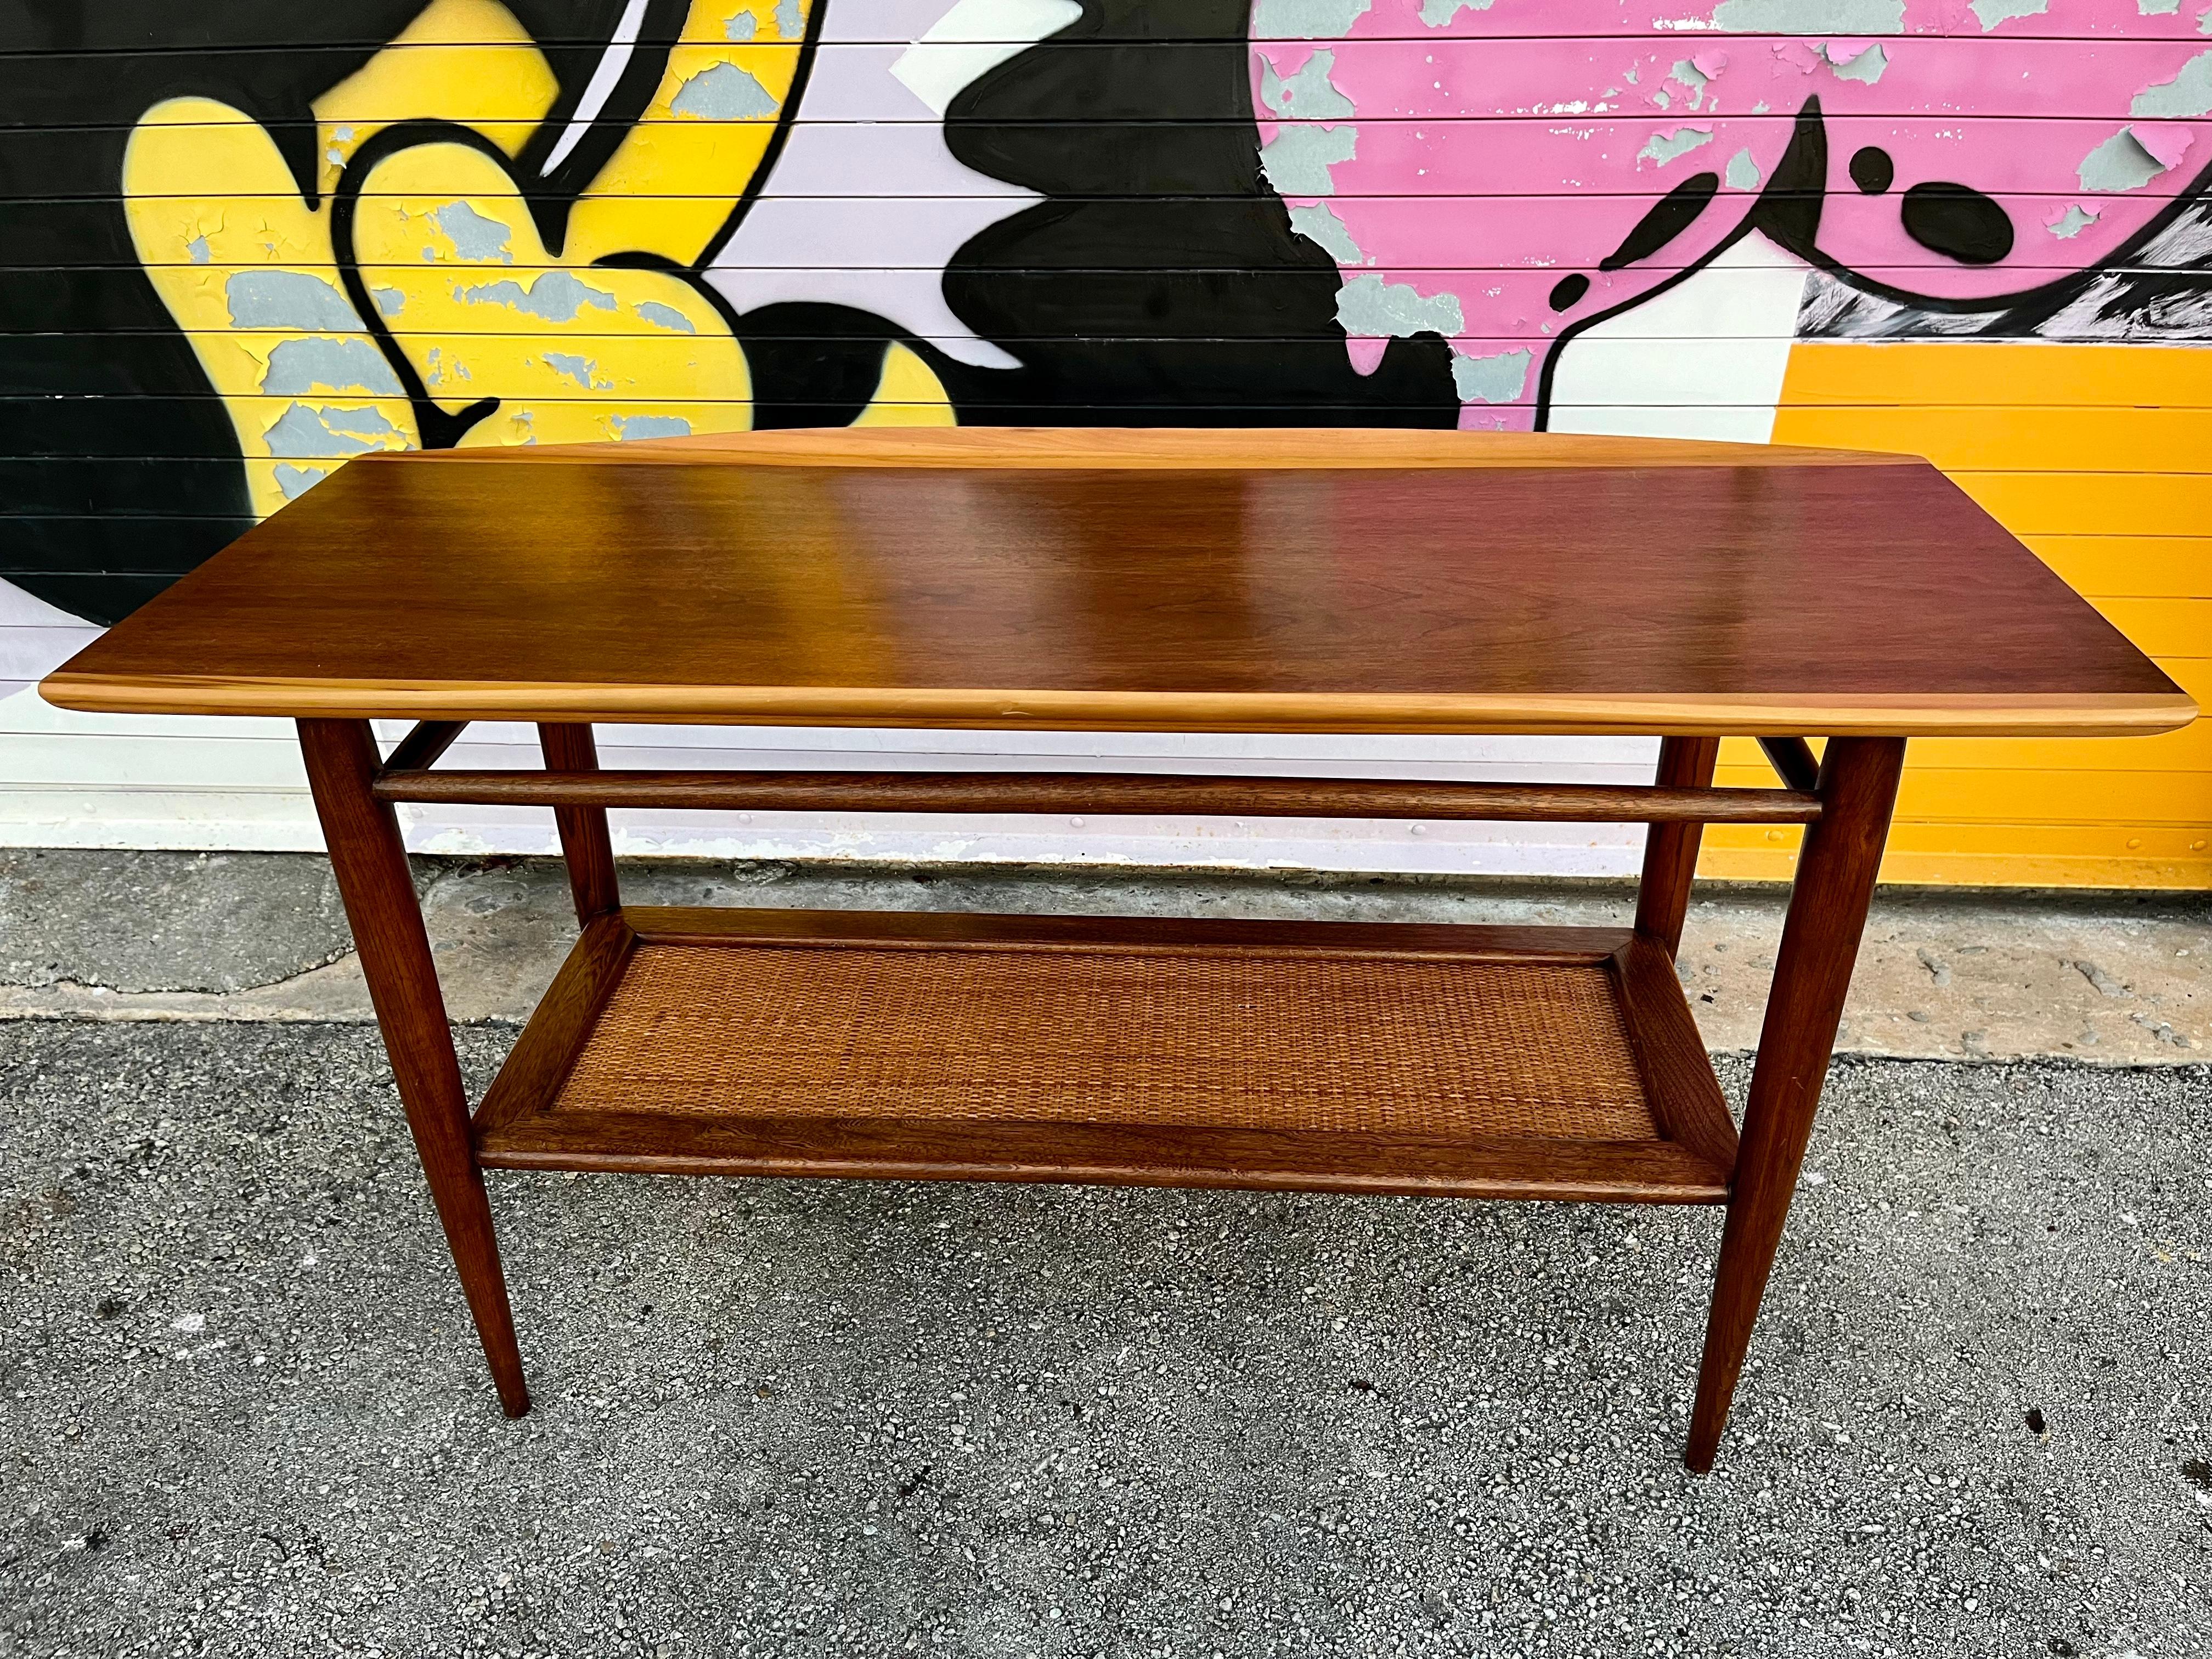 Vintage Mid Century Modern Danish style surfboard two tier Console / Sofa/ Entry Table by Bassett. Circa 1960s.
Features a quintessential MCM Sleek profile with a beautiful wood grain and two tones top  with folded lips and a bottom tier covered